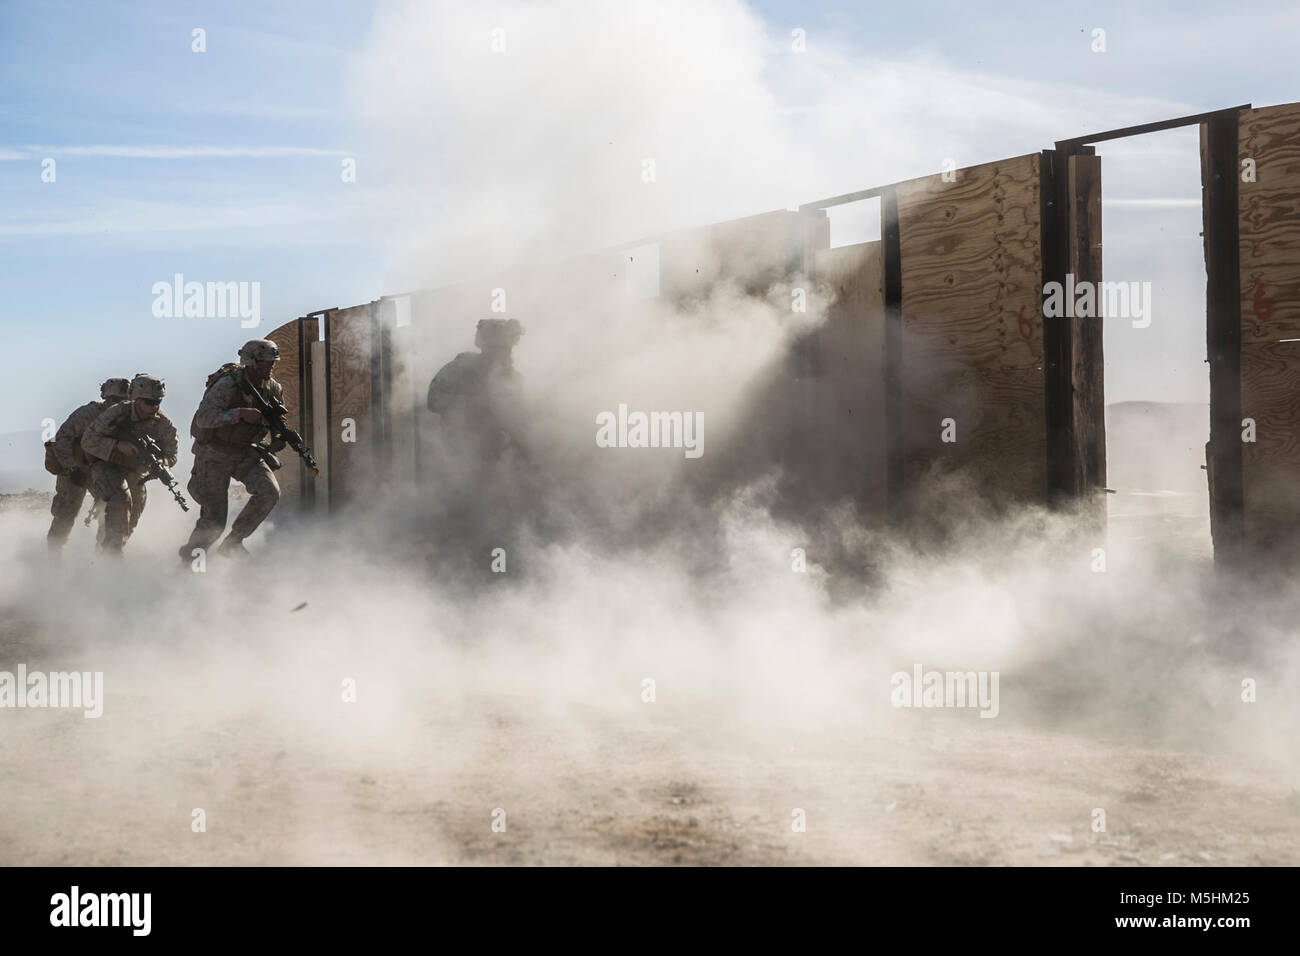 Marines with 3rd Battalion, 7th Marine Regiment, participate in door breaching training at Range 220 aboard the Marine Corps Air Ground Combat Center Twentynine Palms, Calif., Feb. 9, 2018 as part of Integrated Training Exercise 2-18. The purpose of ITX is to create a challenging, realistic training environment that produces combat-ready forces capable of operating as an integrated MAGTF. (U.S. Marine Corps Stock Photo